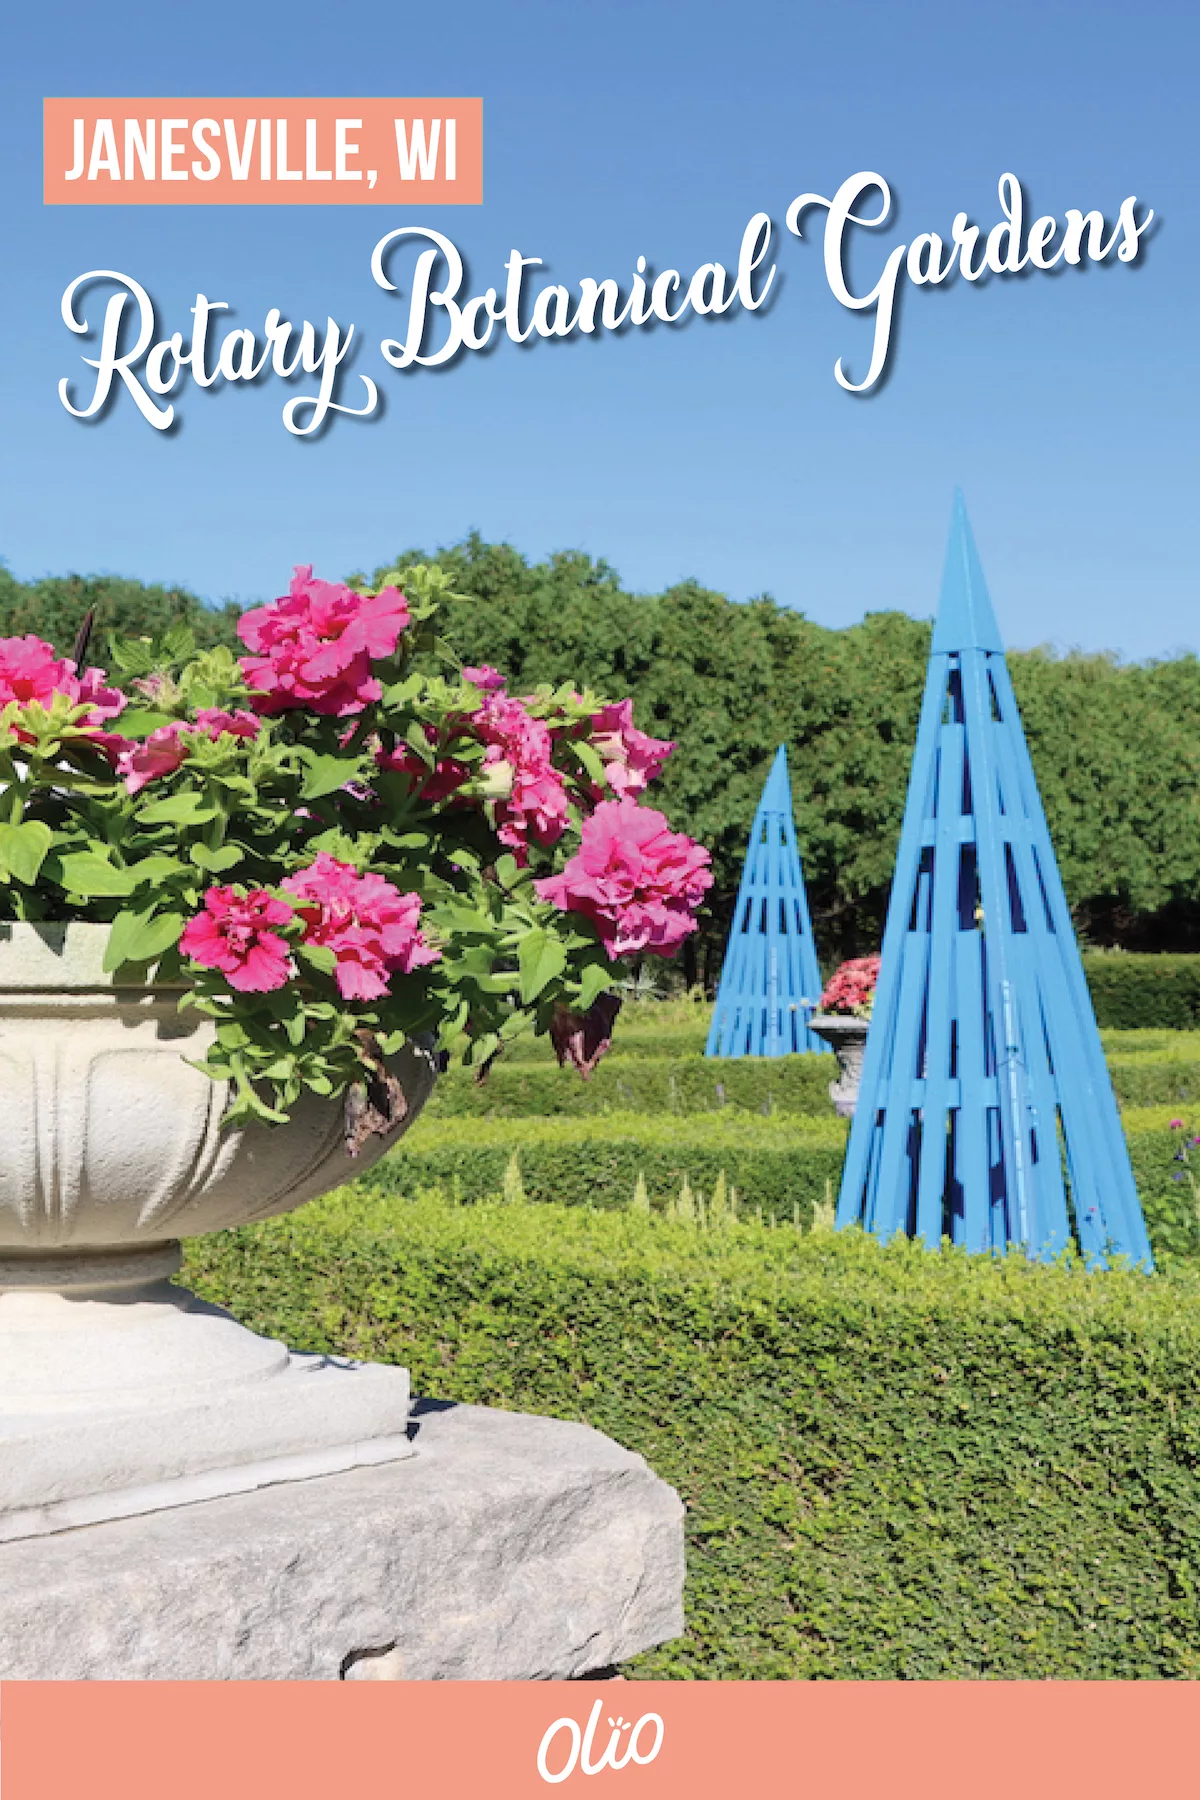 Relax and recharge with an afternoon at the Rotary Botanical Gardens in Janesville, Wisconsin! This 20-acre space features 24 themed gardens and more than 4,000 varieties of beautiful blooms. #Wisconsin